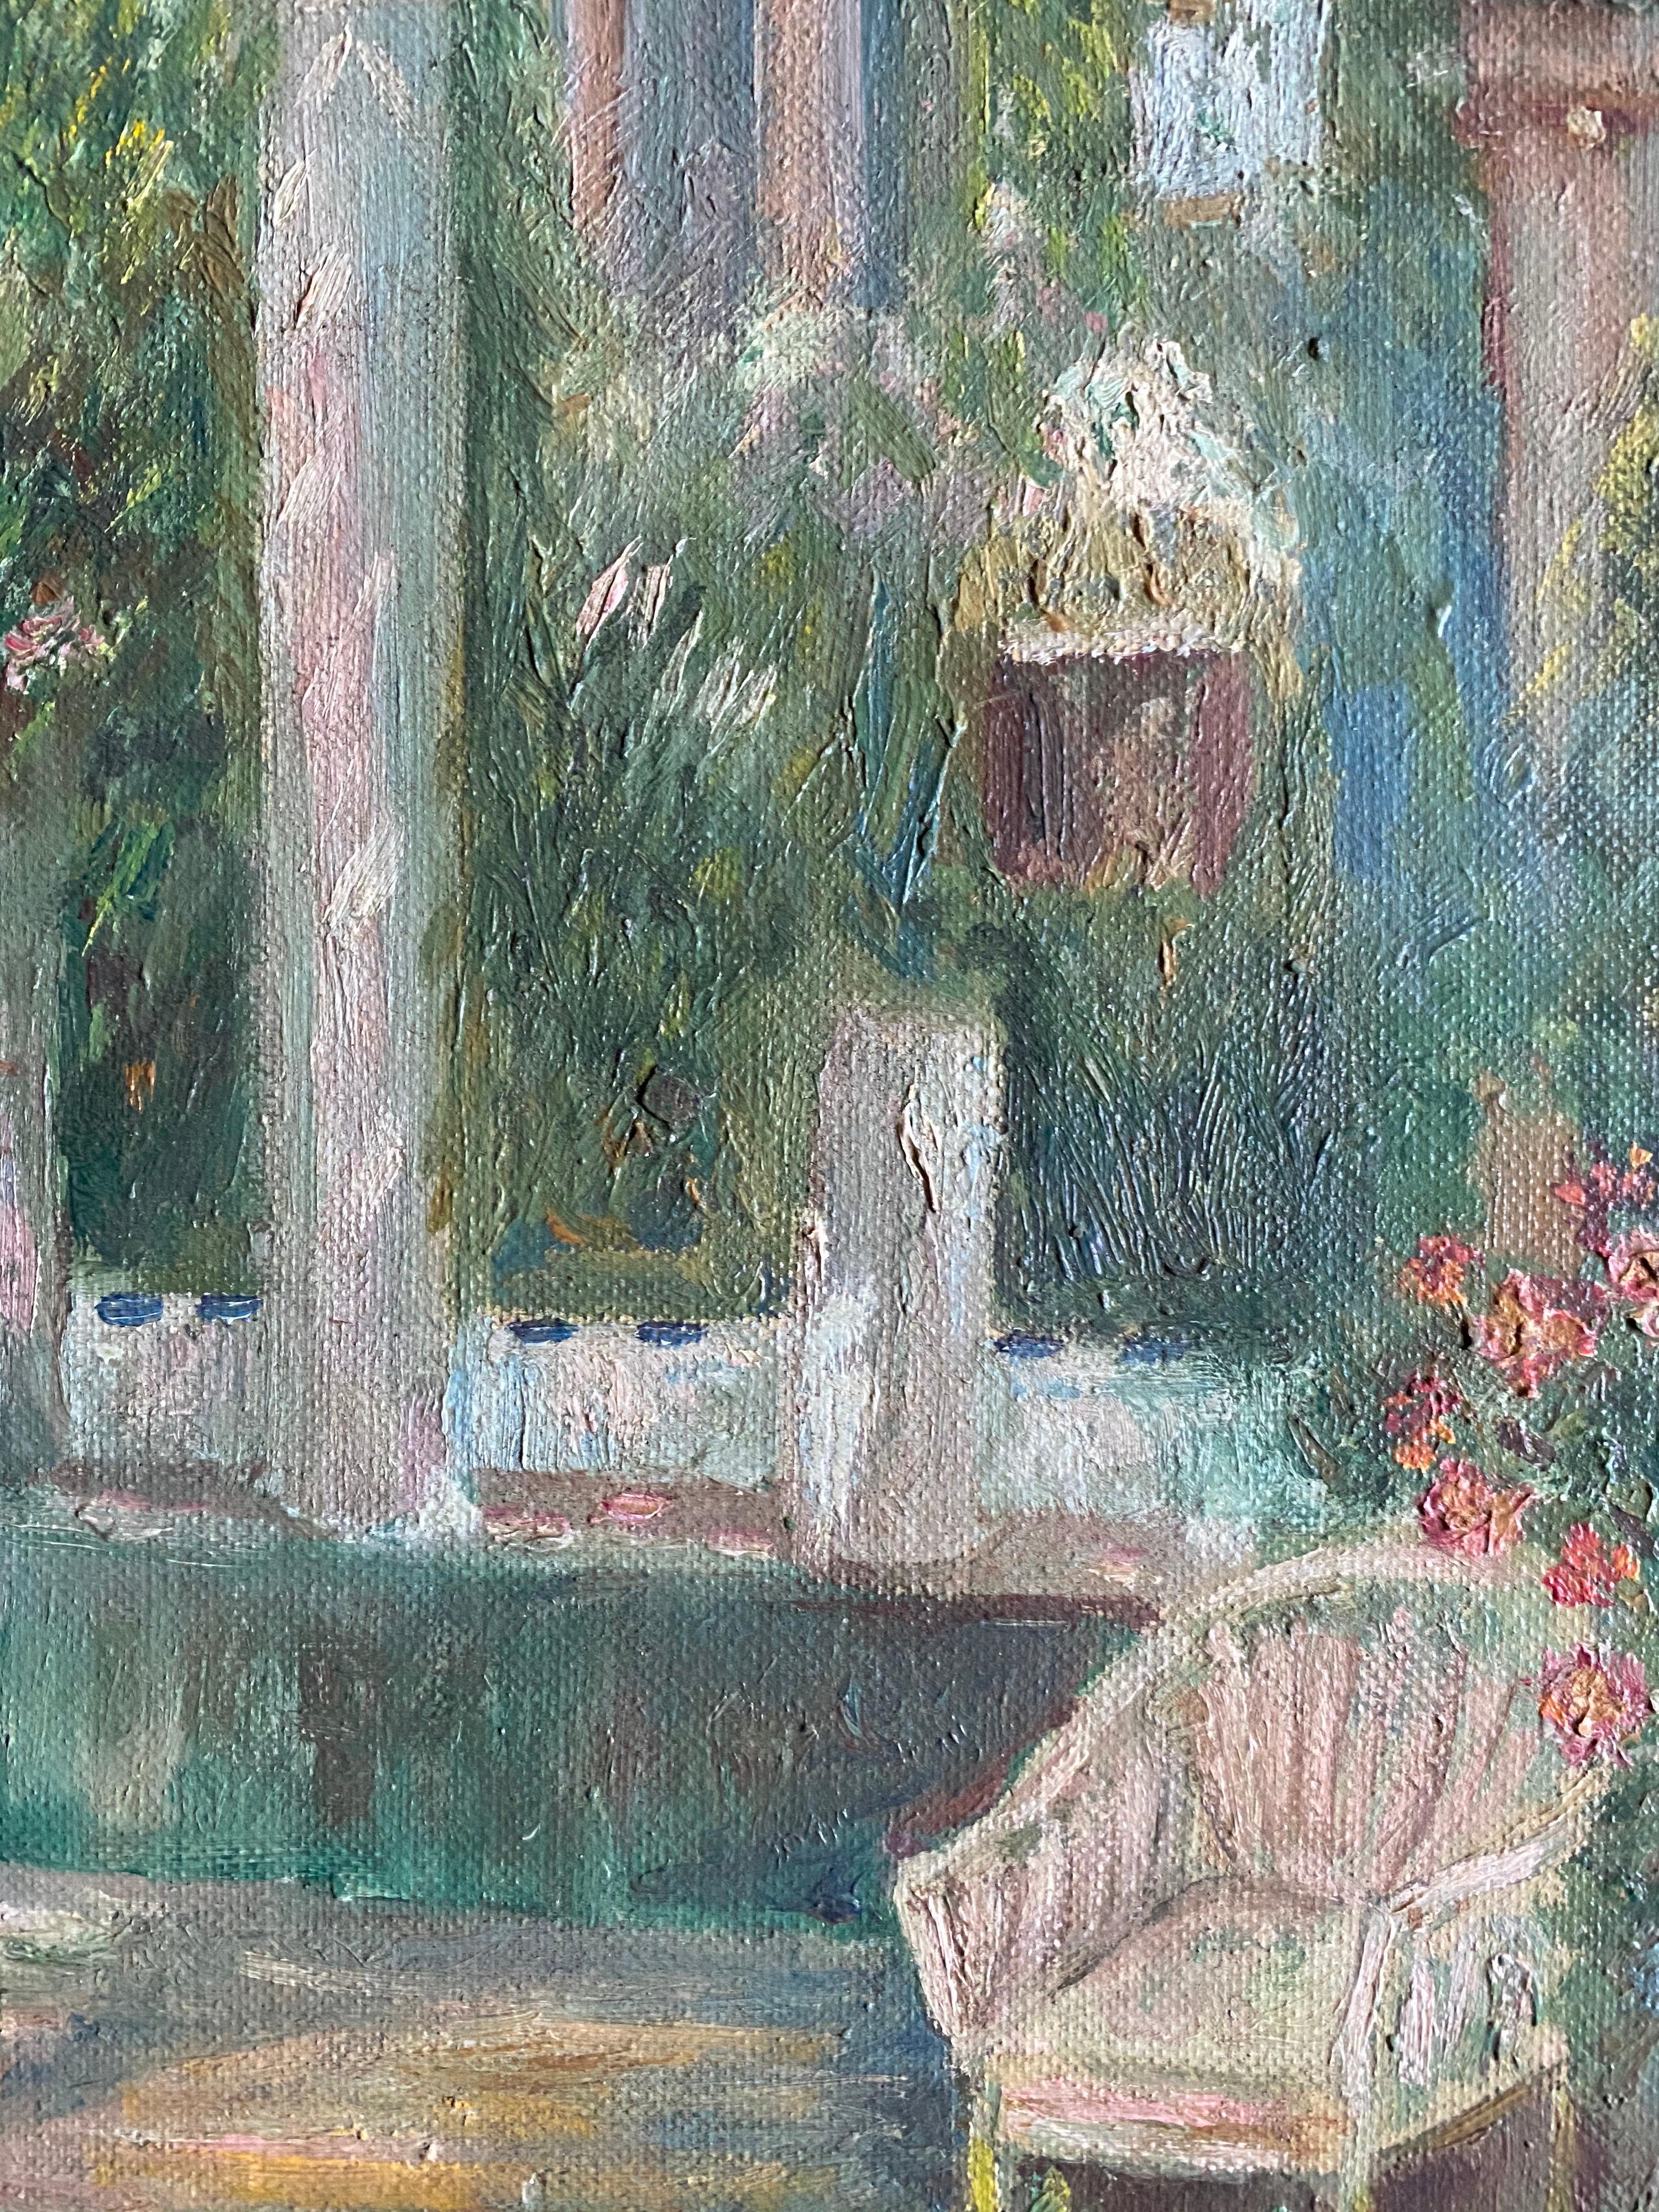 French School, circa 1920's
circle of Gustave Loiseau (French 1865-1935)
oil on canvas laid on board, 13 x 9.5 inches

Delightful quality early 20th century French Impressionist oil painting, depicting this summer garden, with stone house behind. An